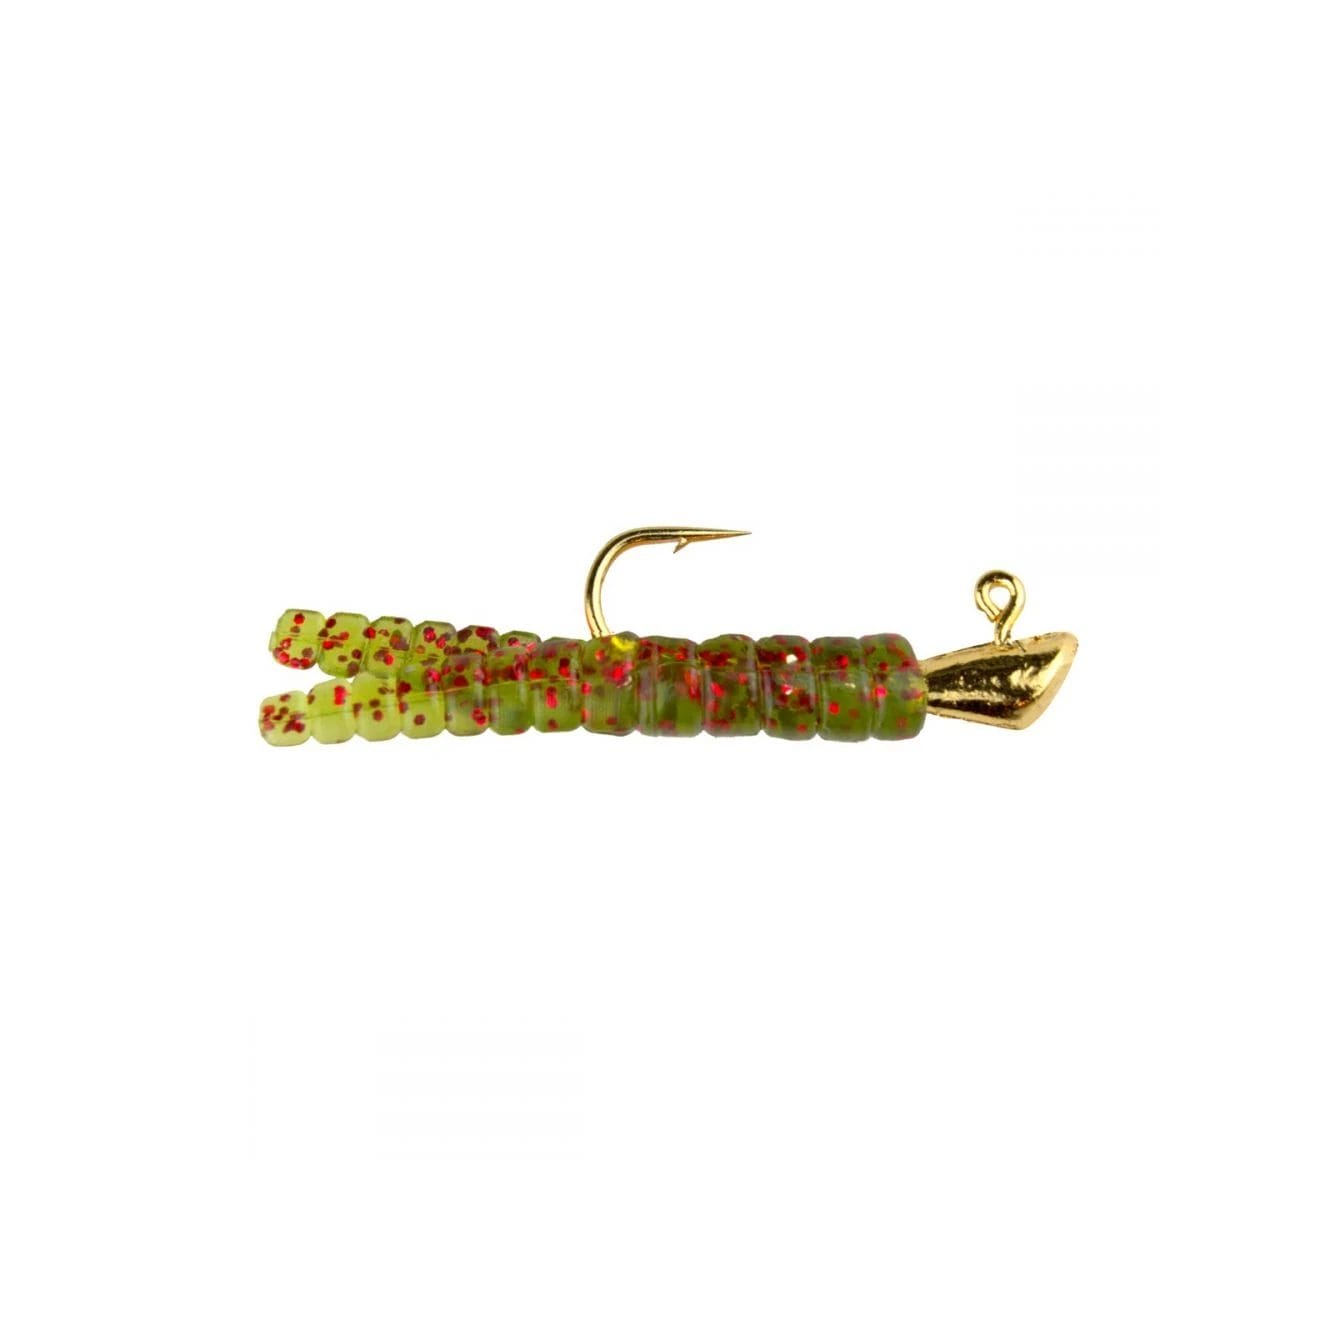 Leland Lures Trout Magnet Gold Glitter Fishing Equipment, Soft Plastic Lures  -  Canada